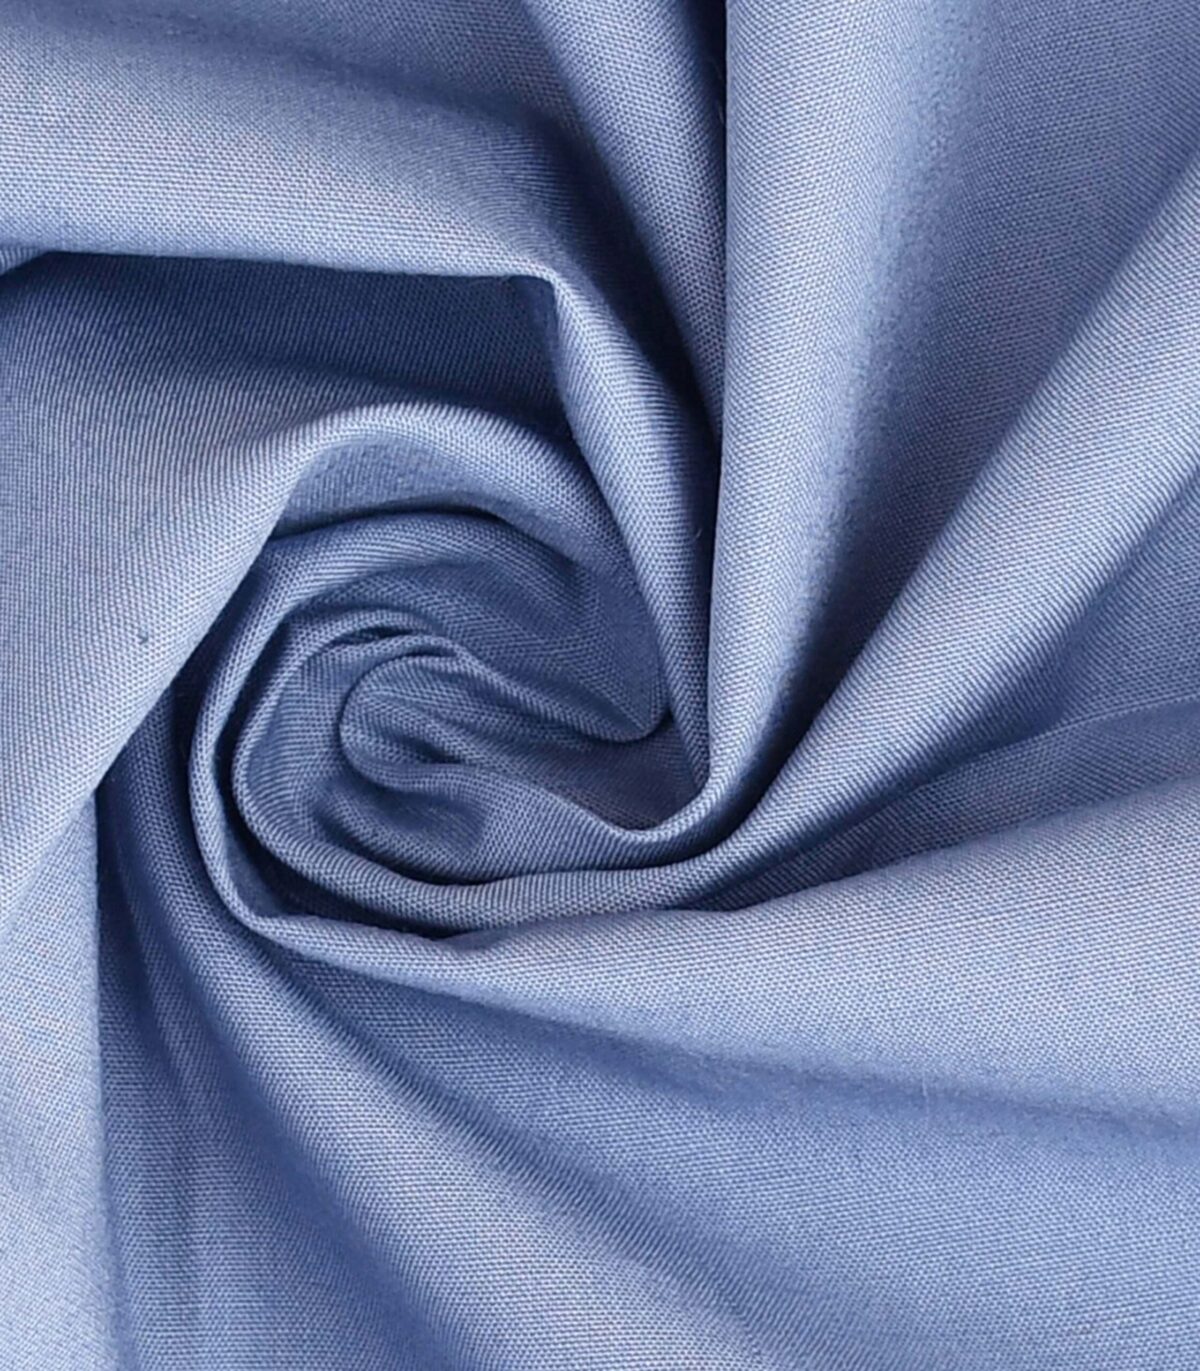 Cotton Light Blue Color Dyed Fabric